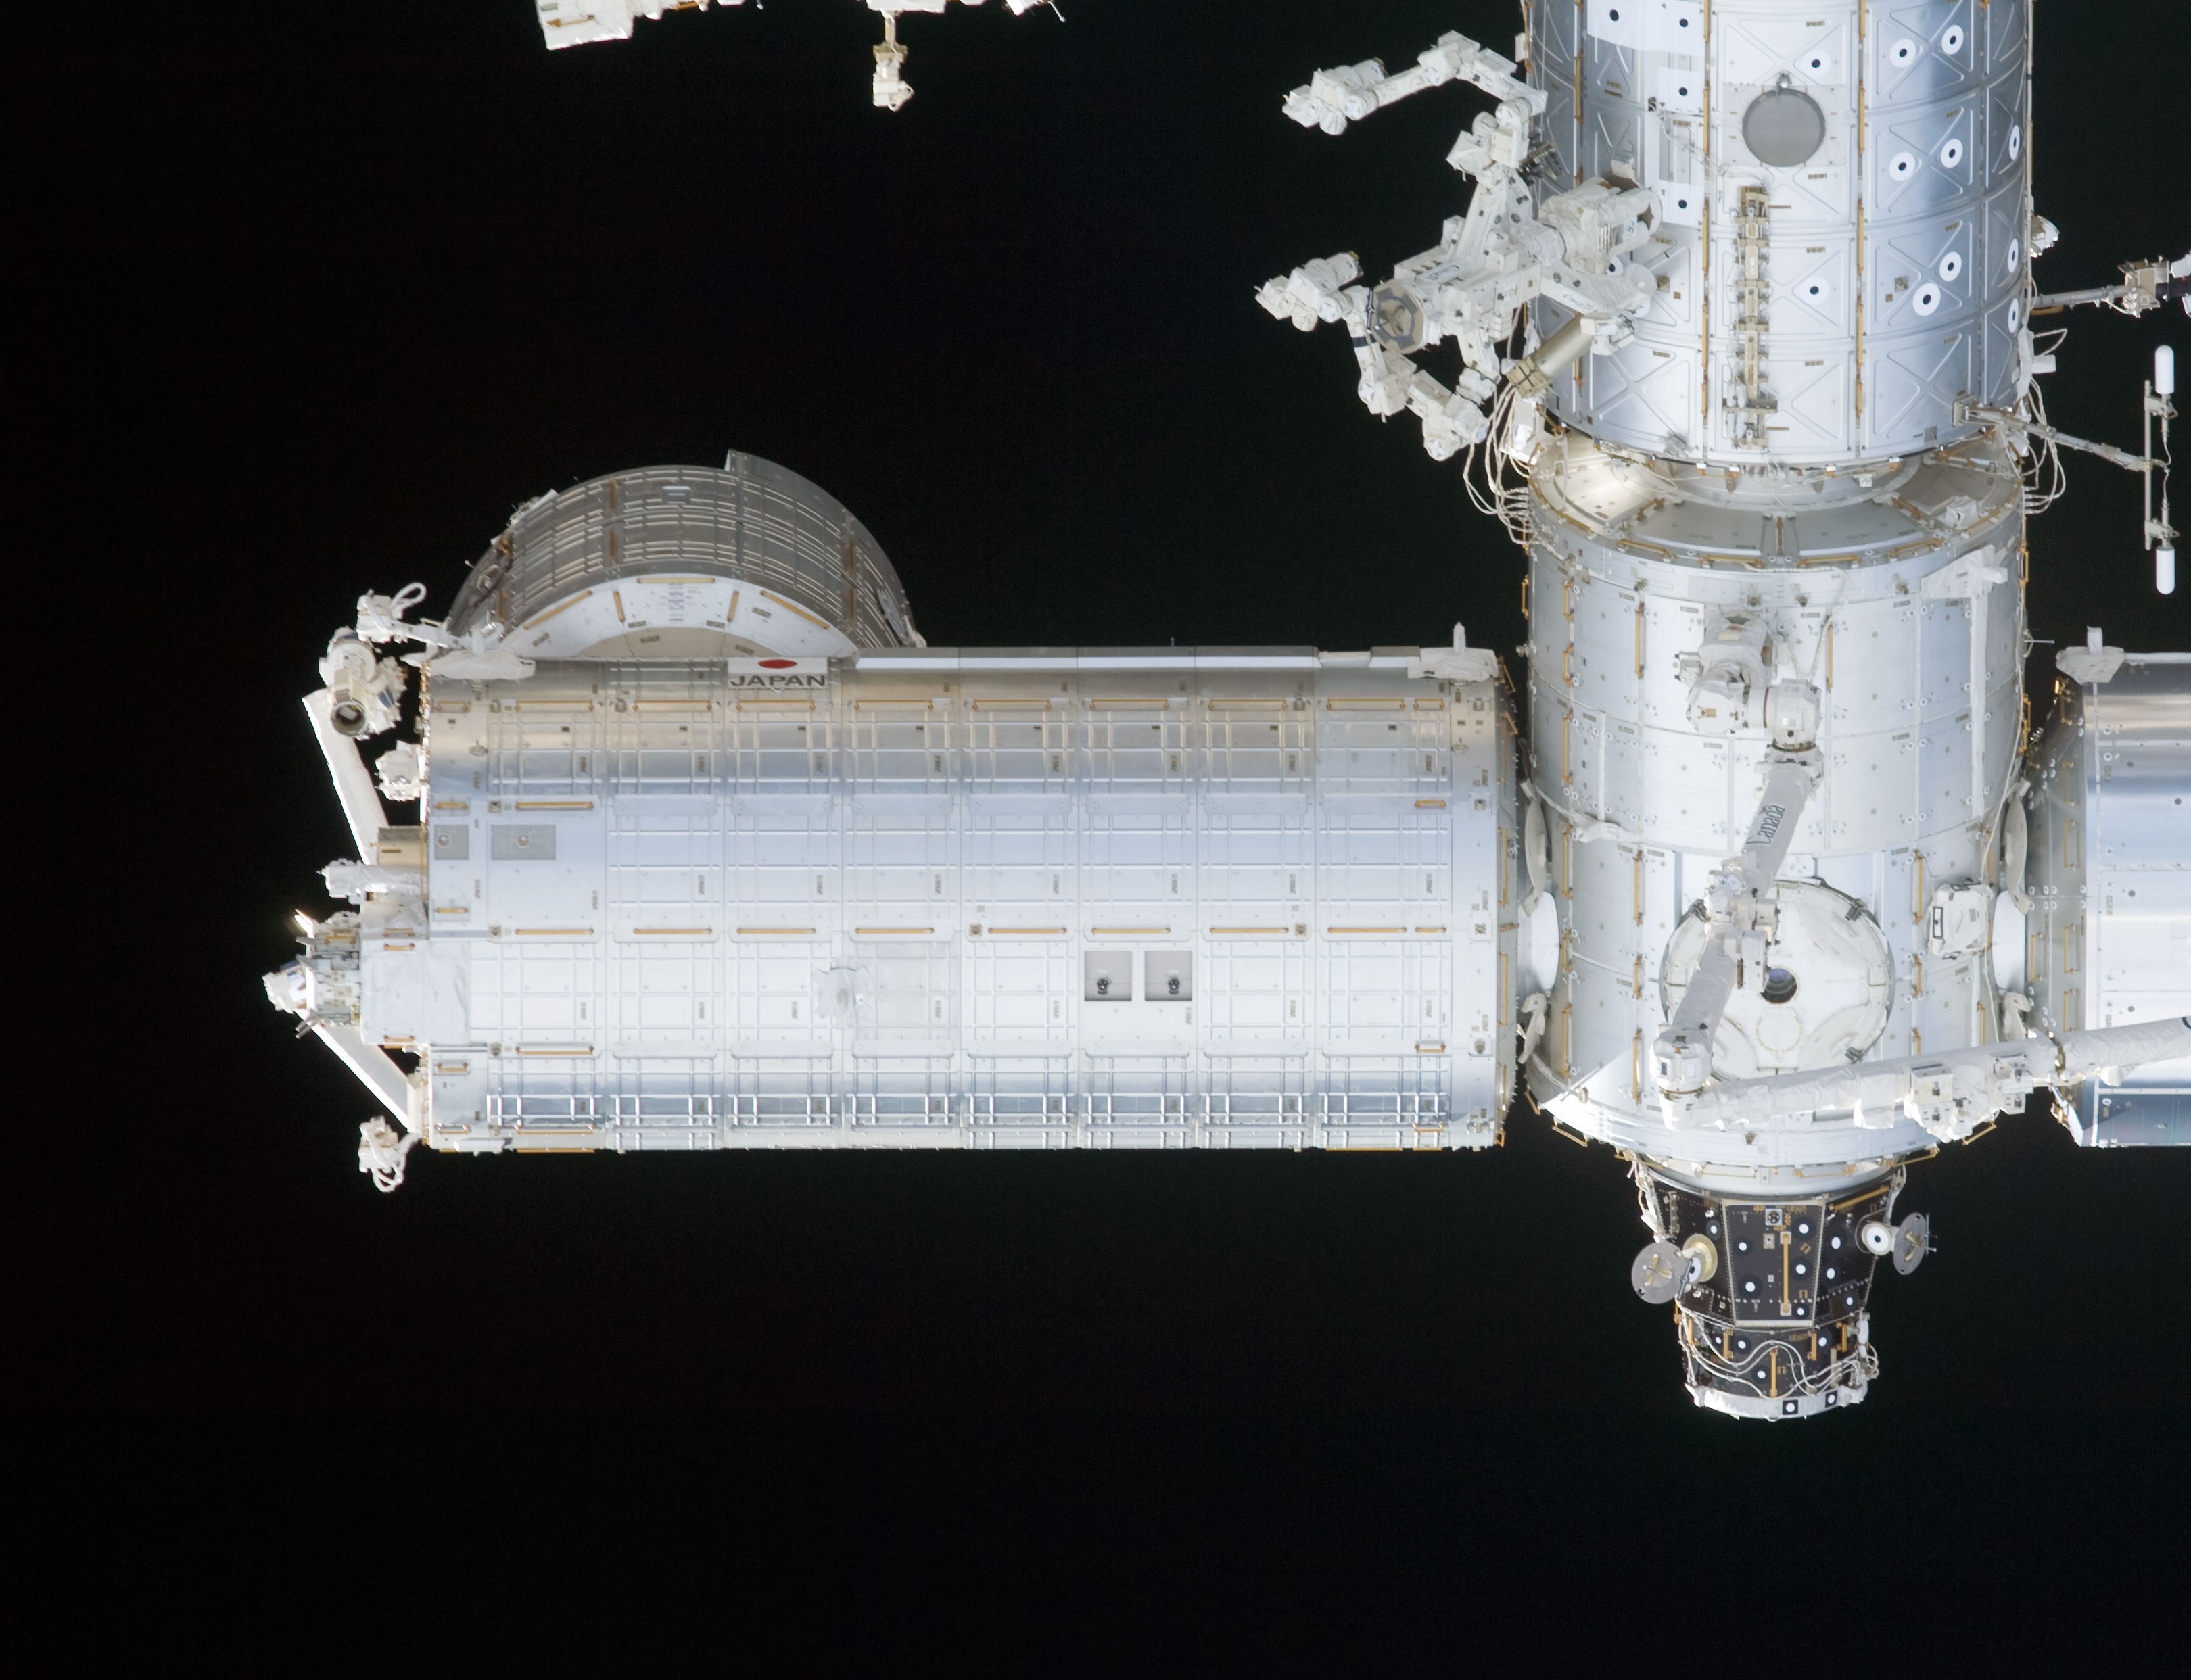 Close up of the Kibo Japanese Experiment Module – the astronauts attached the Exposed Facility at the left end of the module